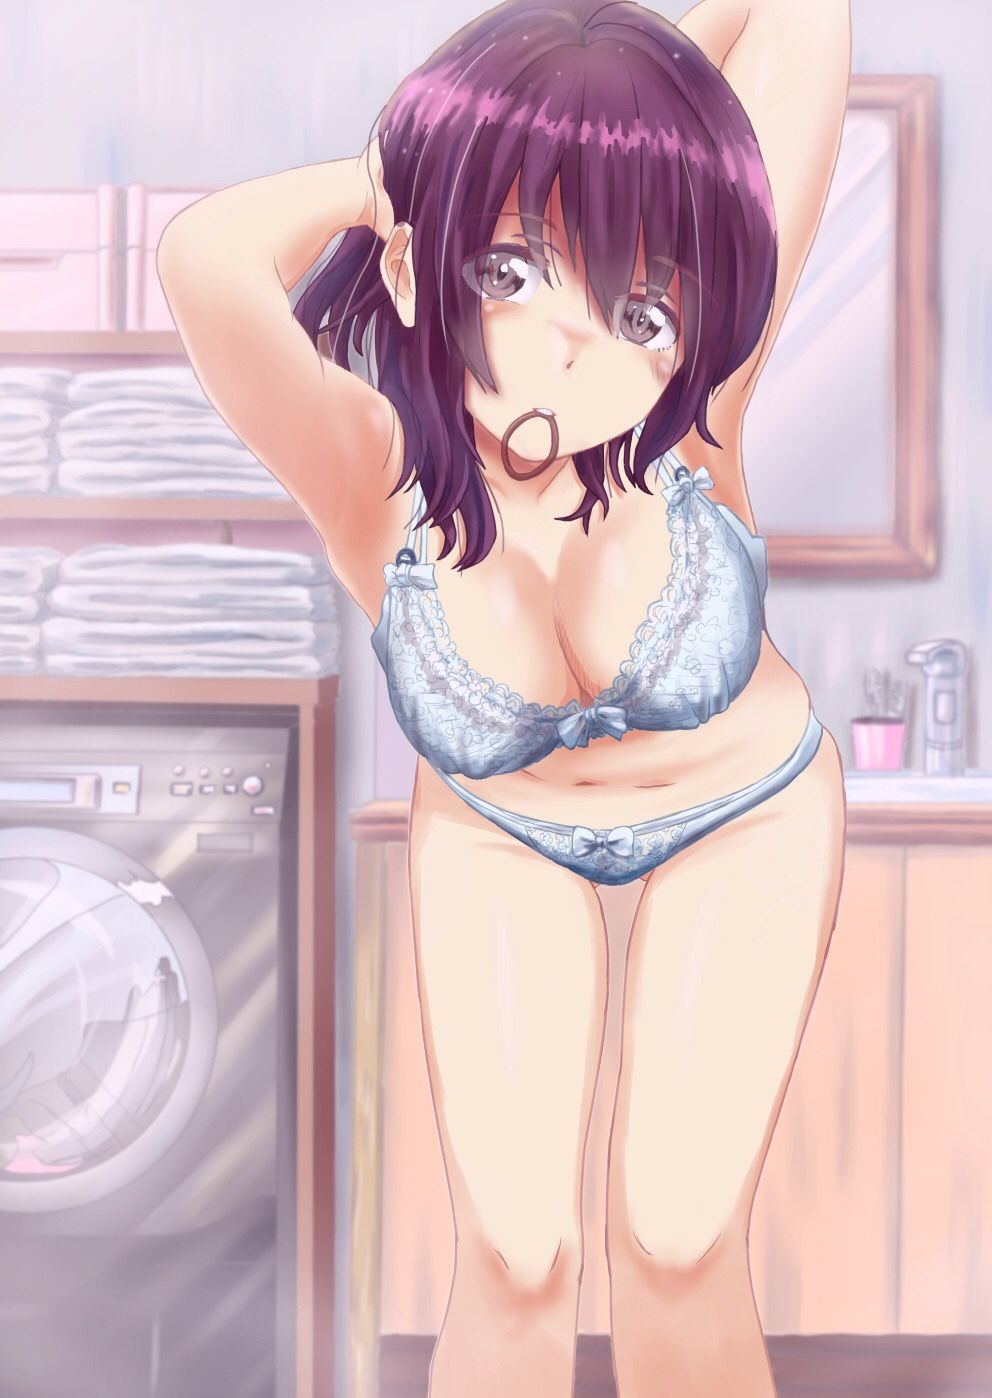 Erotic anime summary erotic image of a girl who is pretty good underwear [secondary erotic] 5